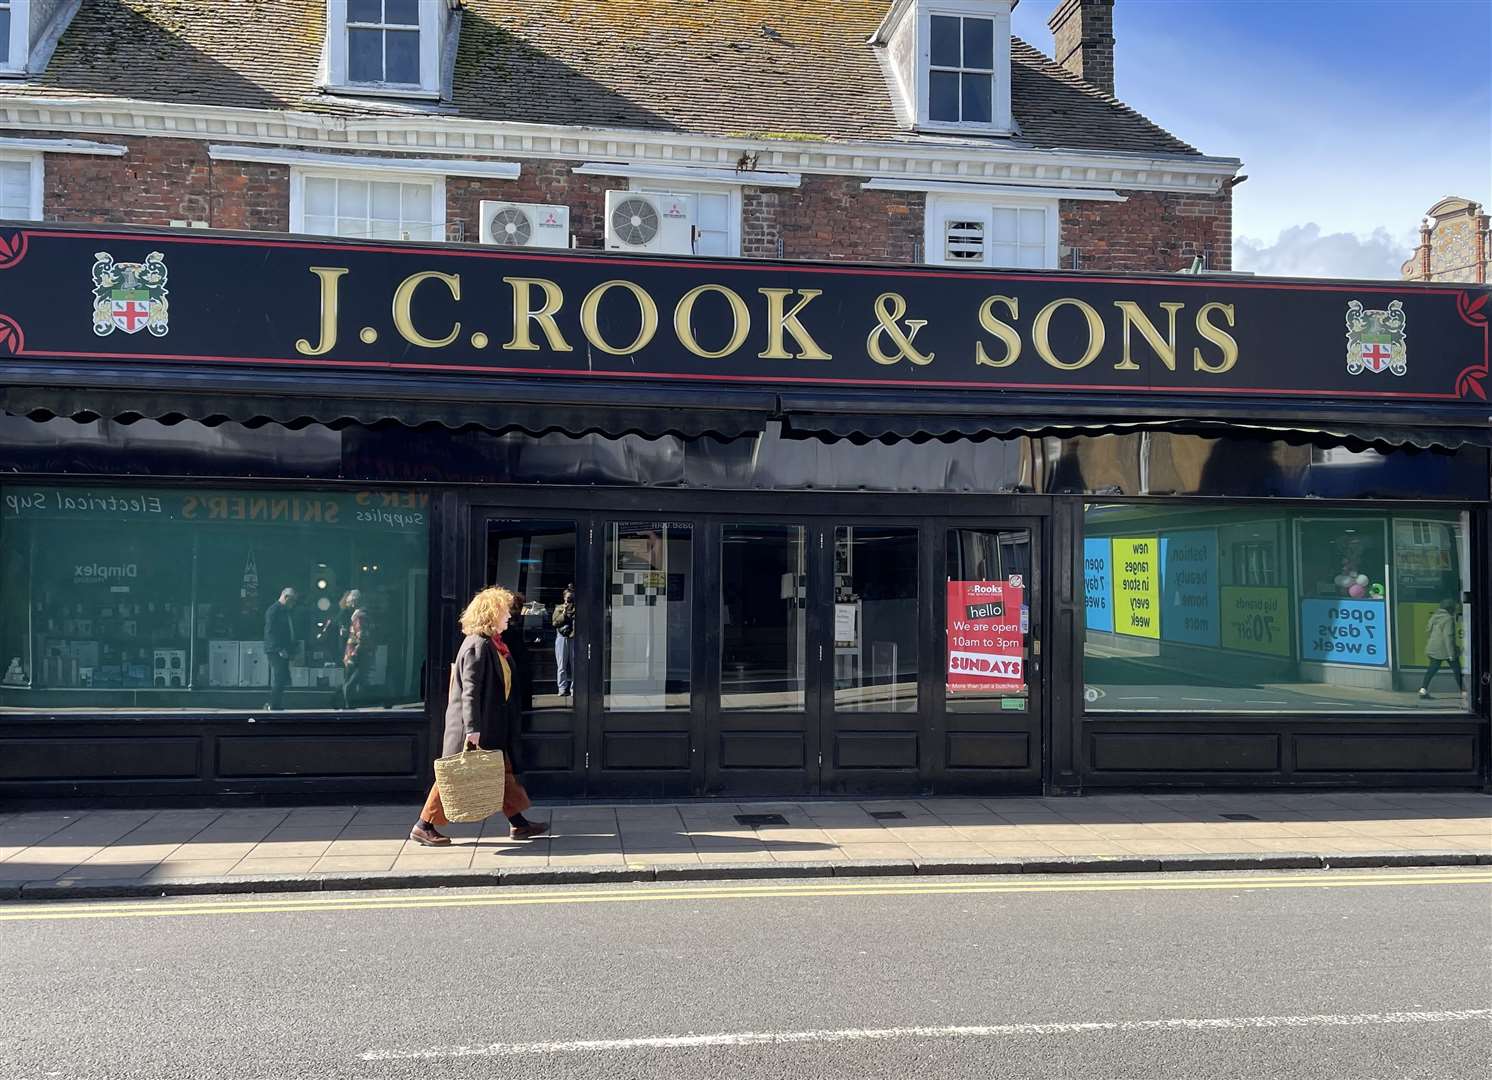 Rooks in Deal is one of 11 branches to have gone into administration